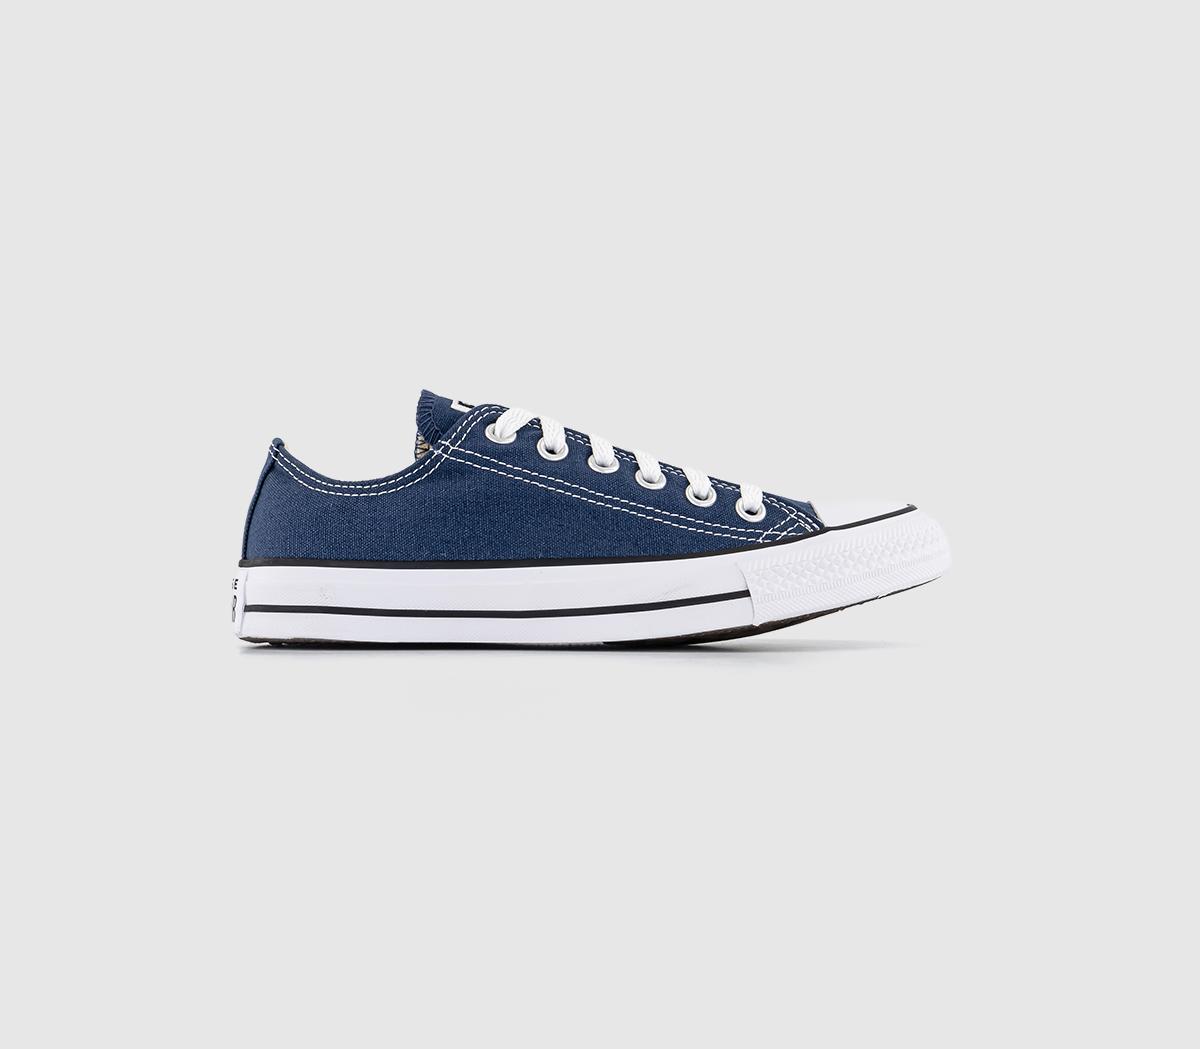 Converse All Star Low Canvas Trainers In Navy Blue And White